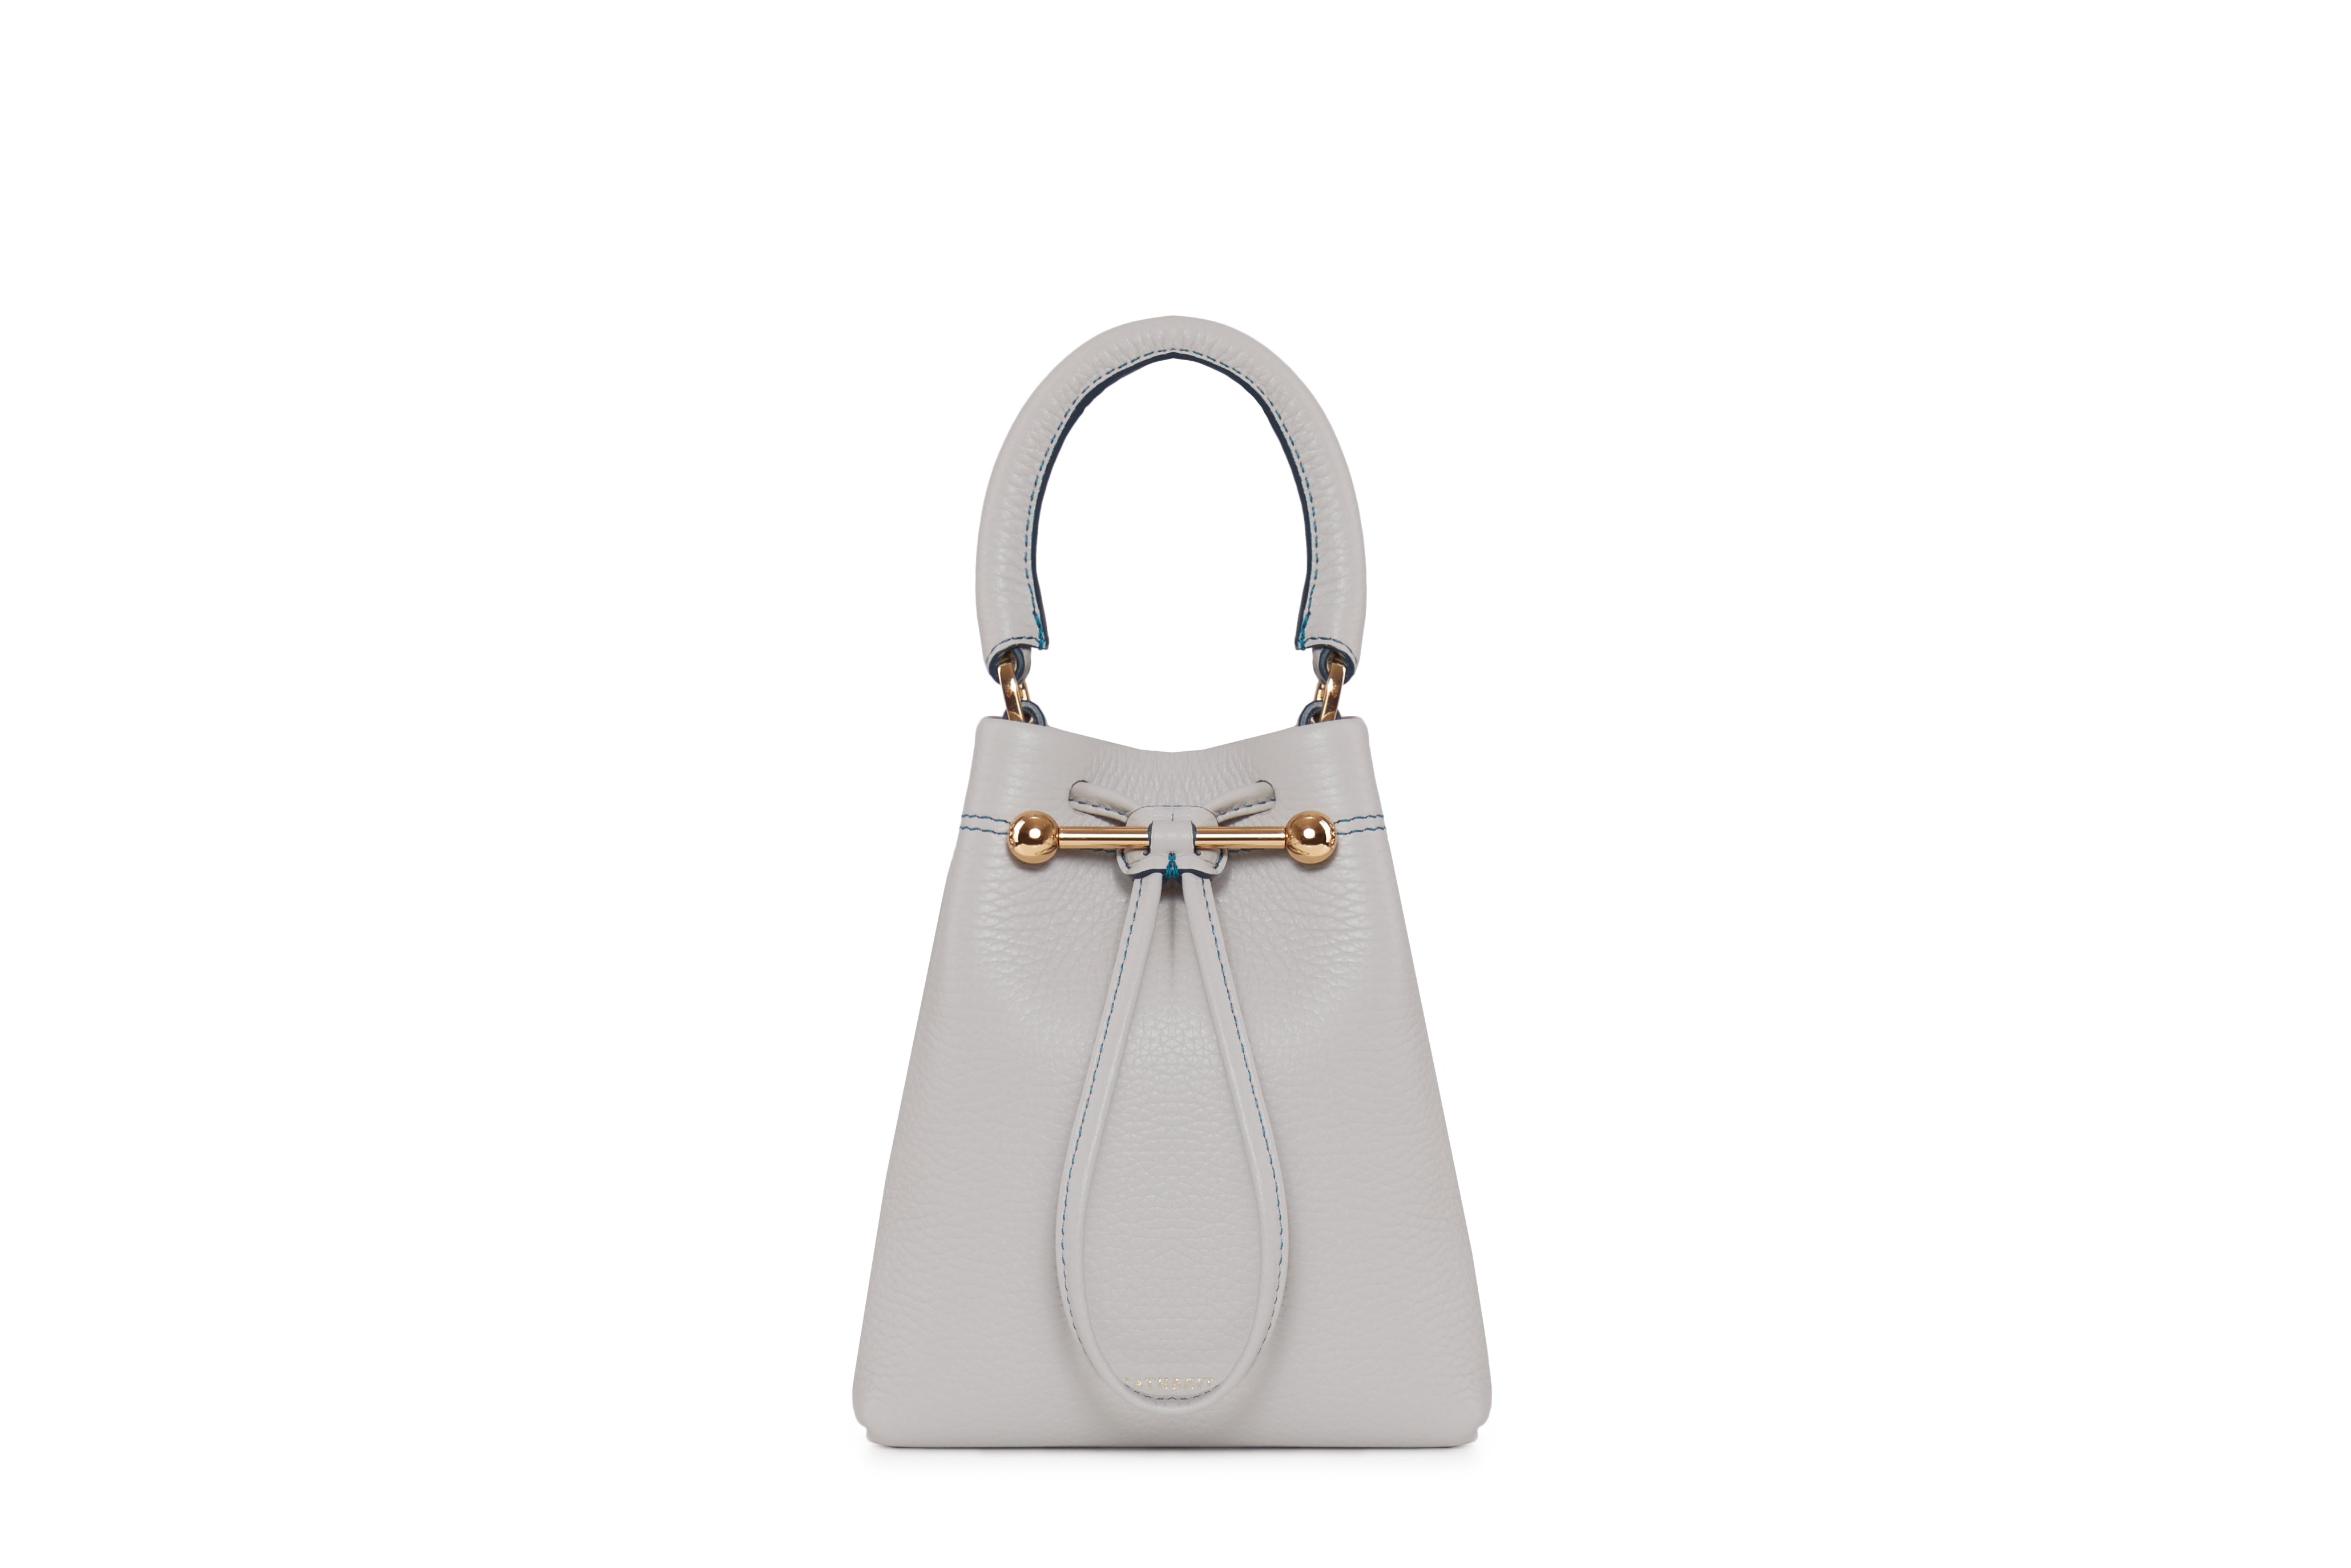 Sarah Jessica Parker Just Released Handbags with Strathberry